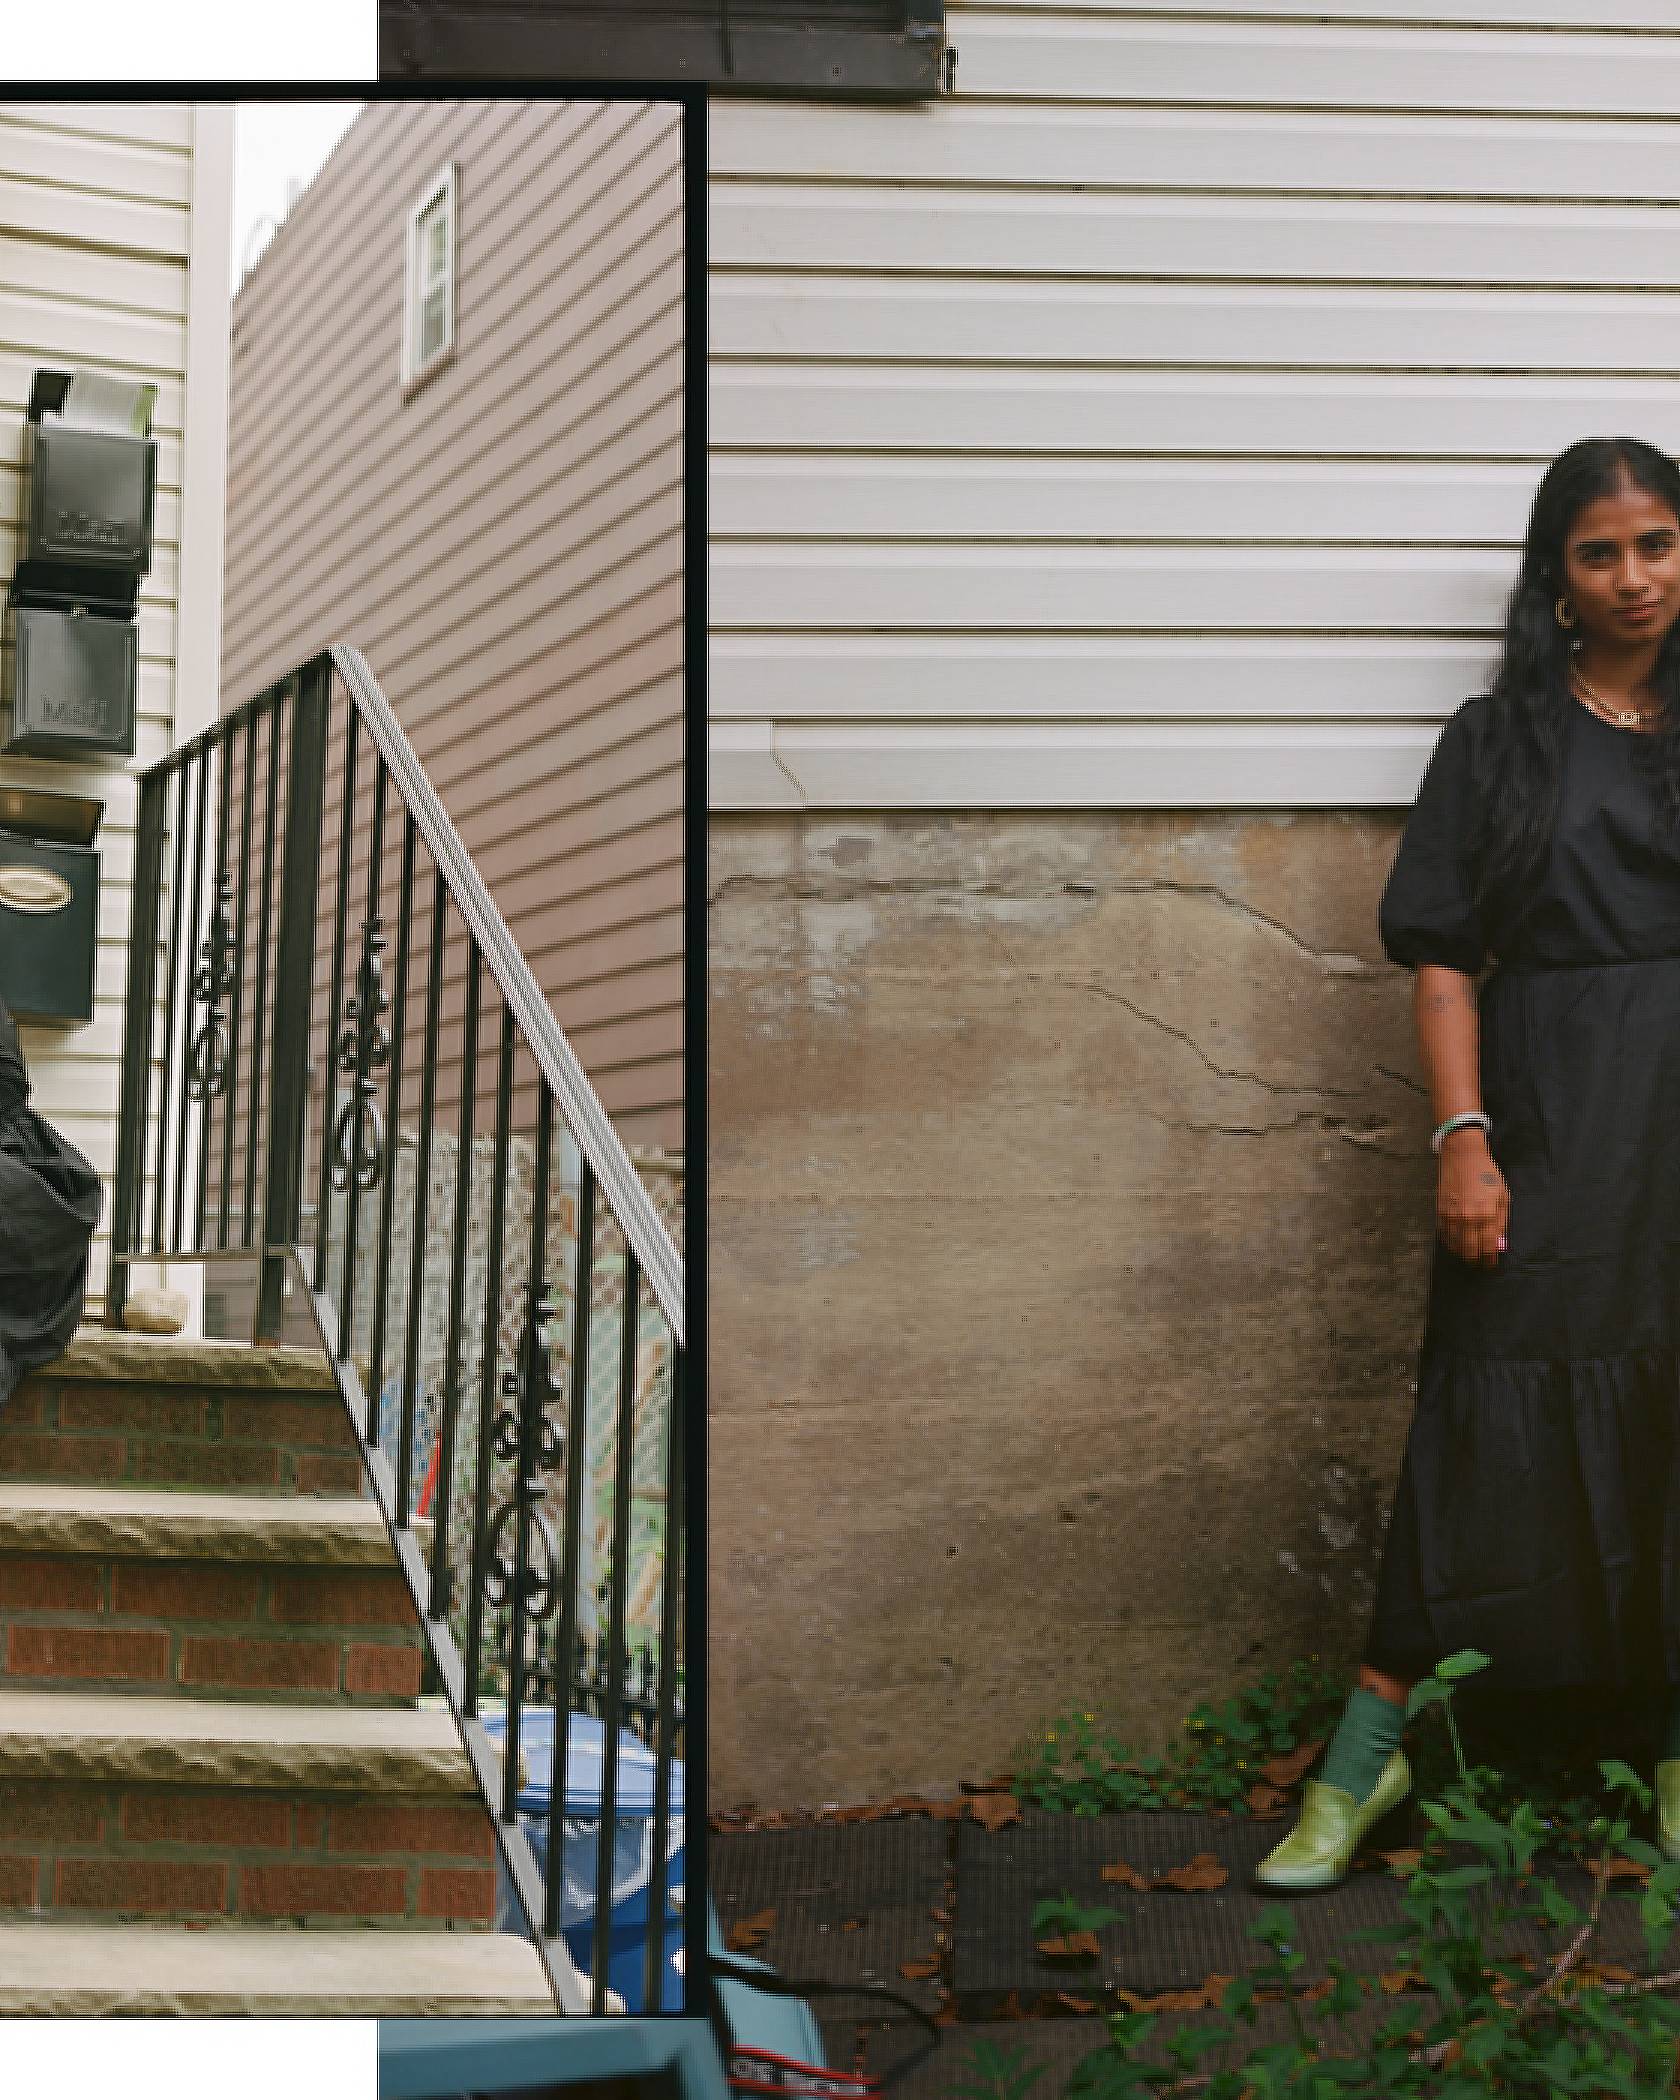 Side by side portraits of Fariha Róisín standing outside her home in New York City.